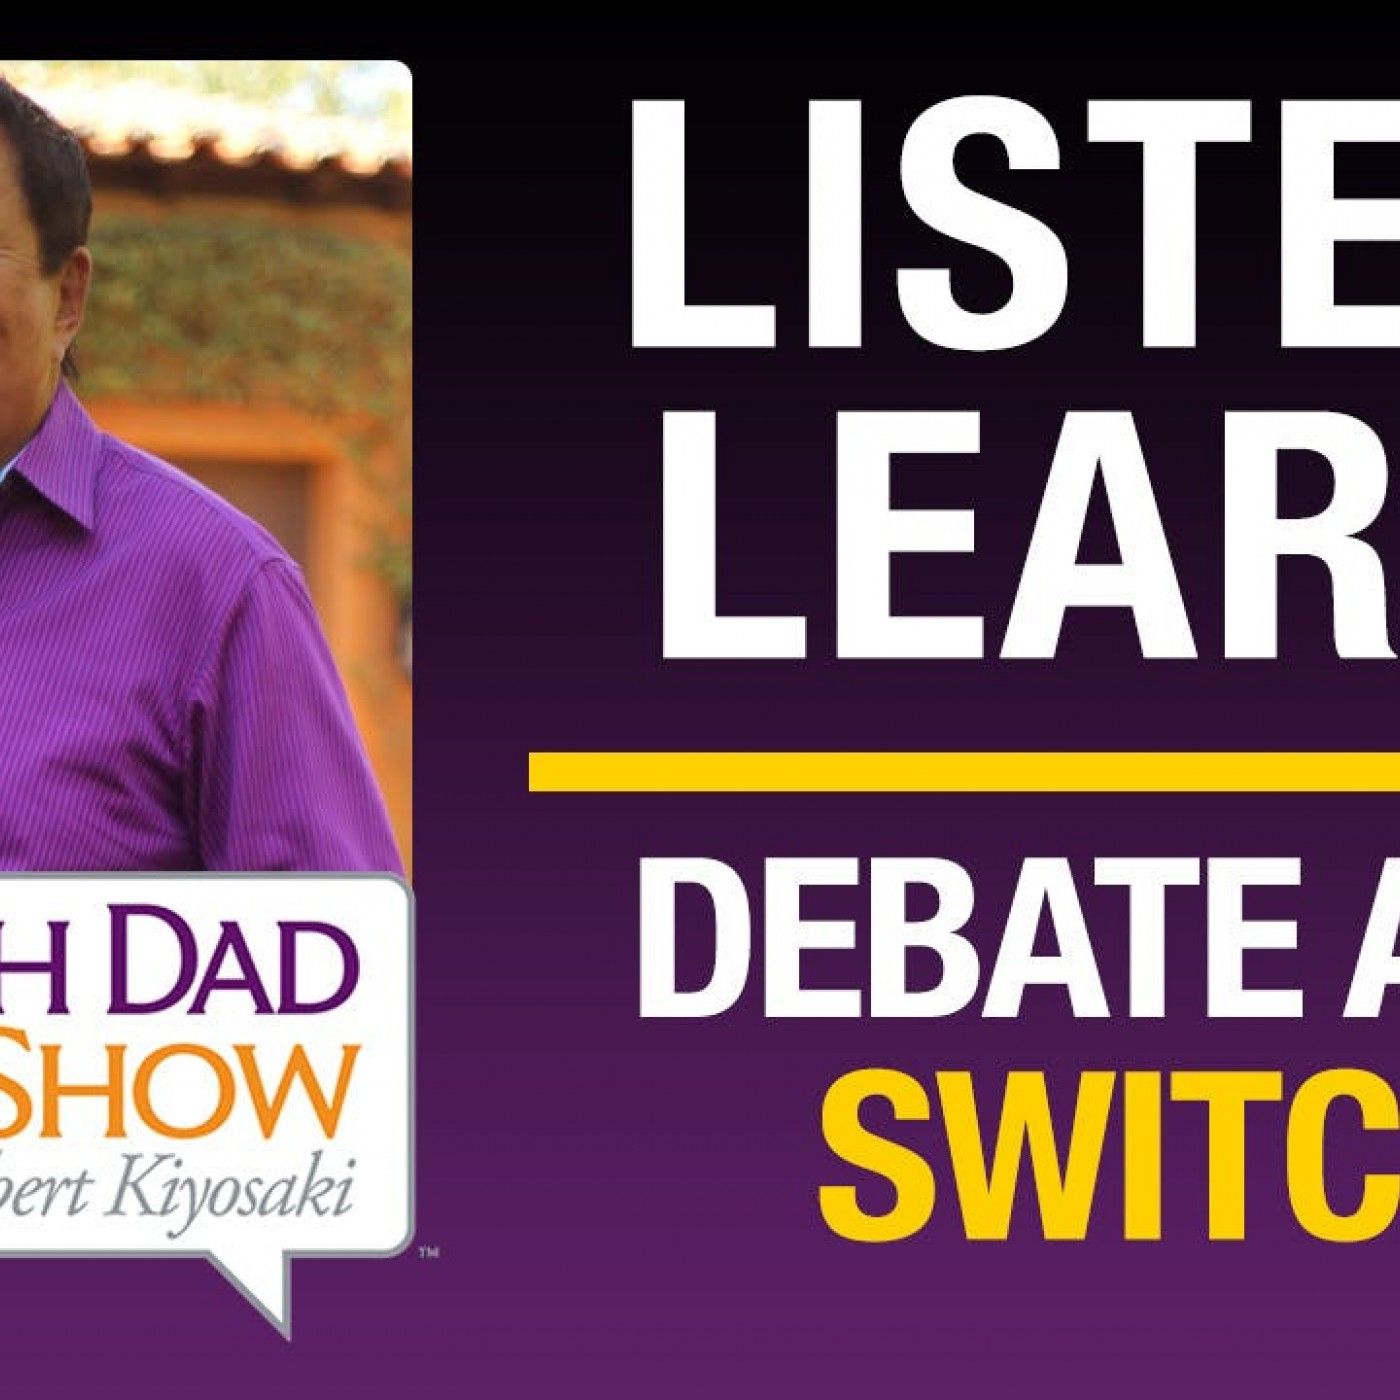 Debate and Switch